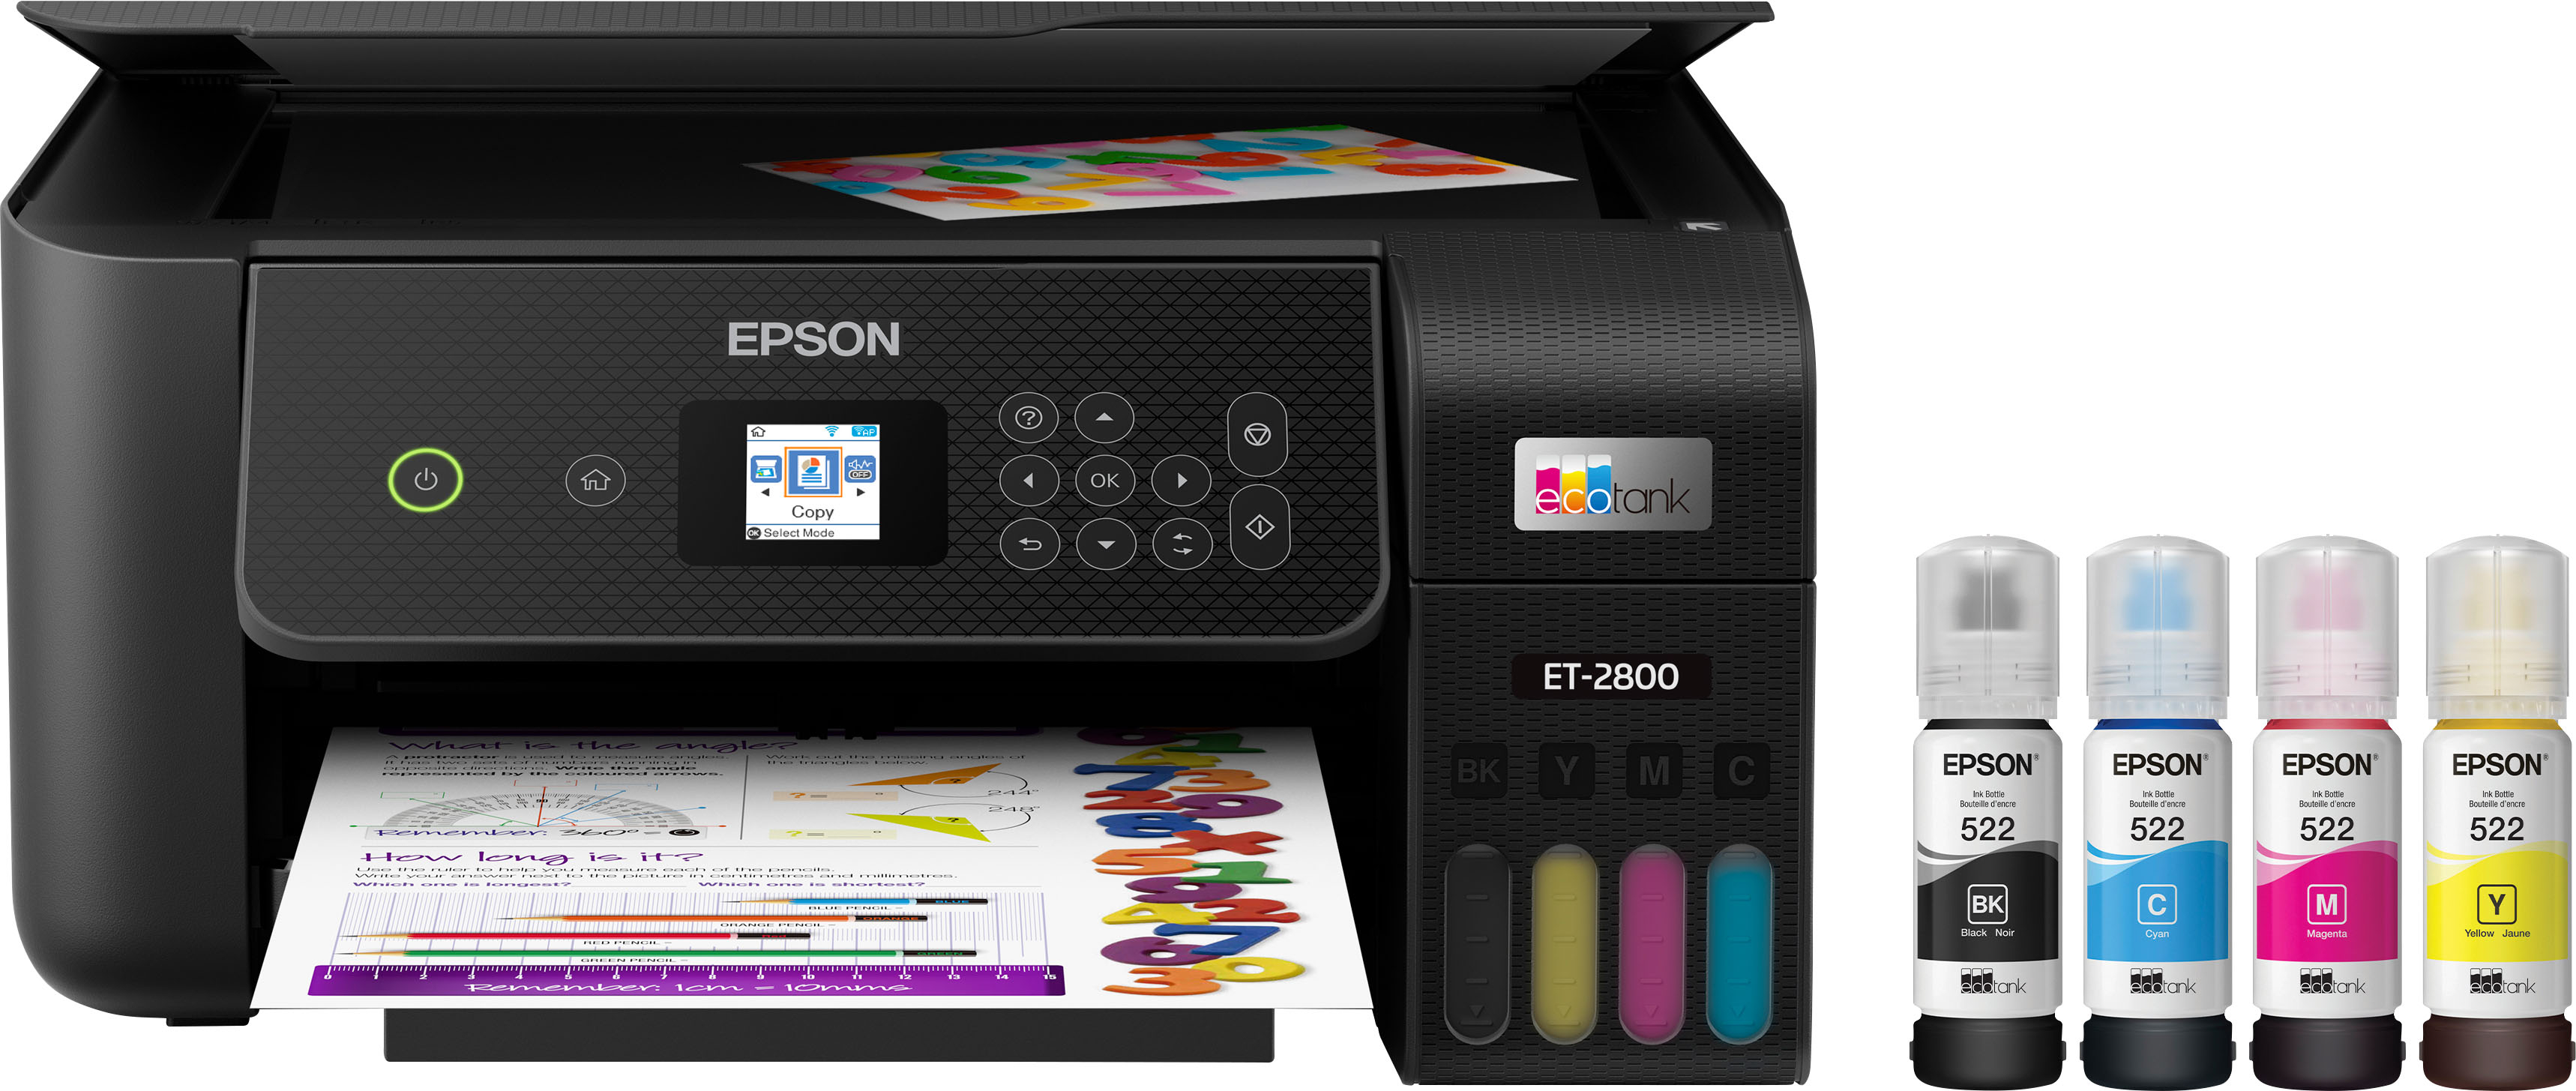 HP Smart Tank 6001 Wireless All-in-One Ink Tank Printer; with up to 2 years  of ink included - Micro Center